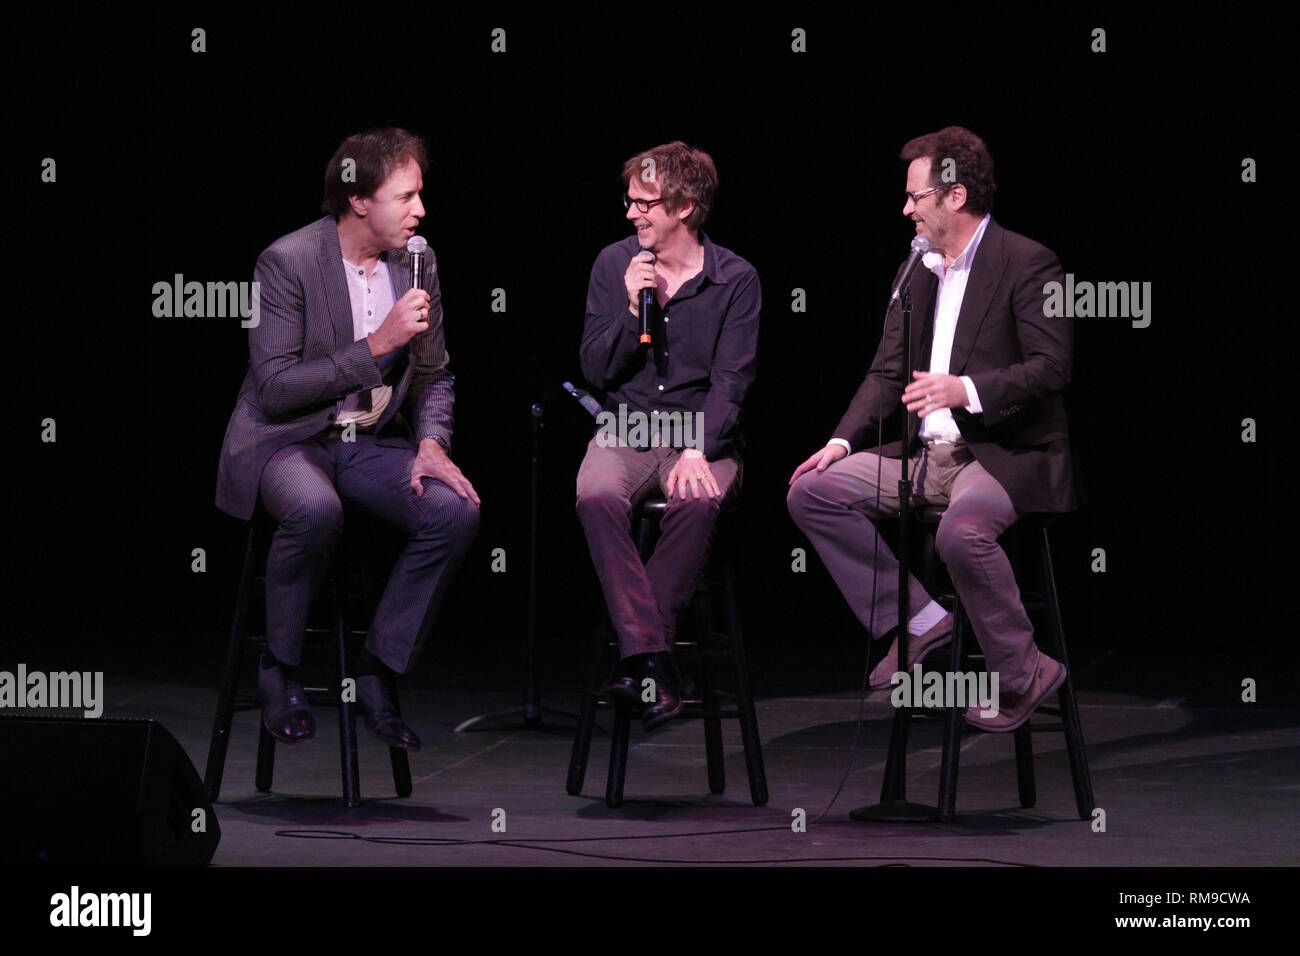 Comedians Kevin Nealon, Dana Carvey and Dennis Miller are shown during a 'Question and Answer' segment that follwoed their 'live' concert performances. Stock Photo